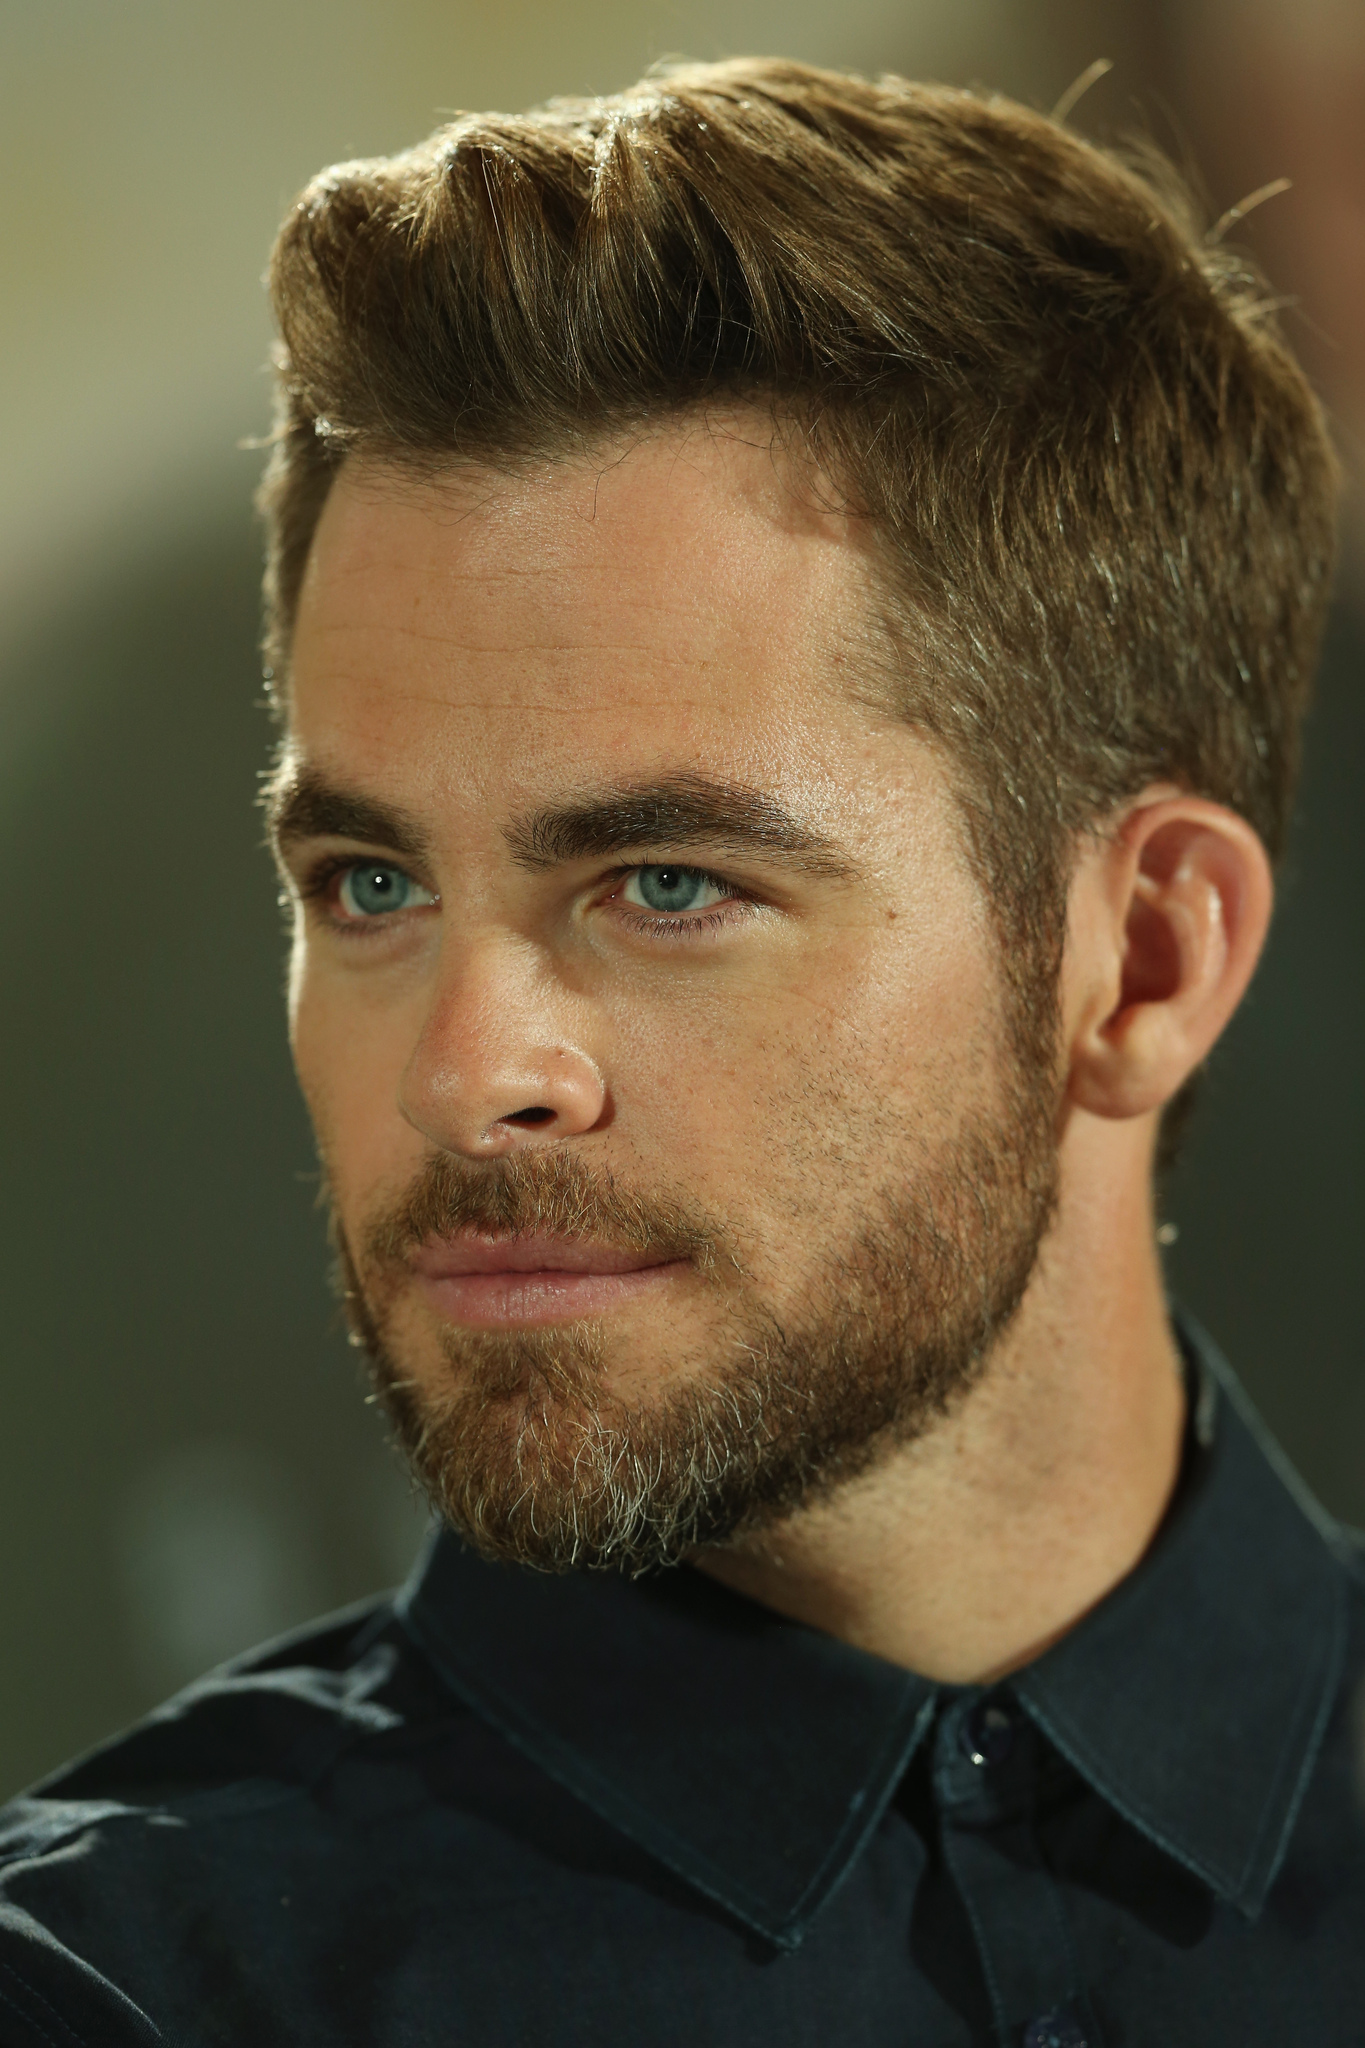 30 Interesting Things Most People Don’t Know About Chris Pine